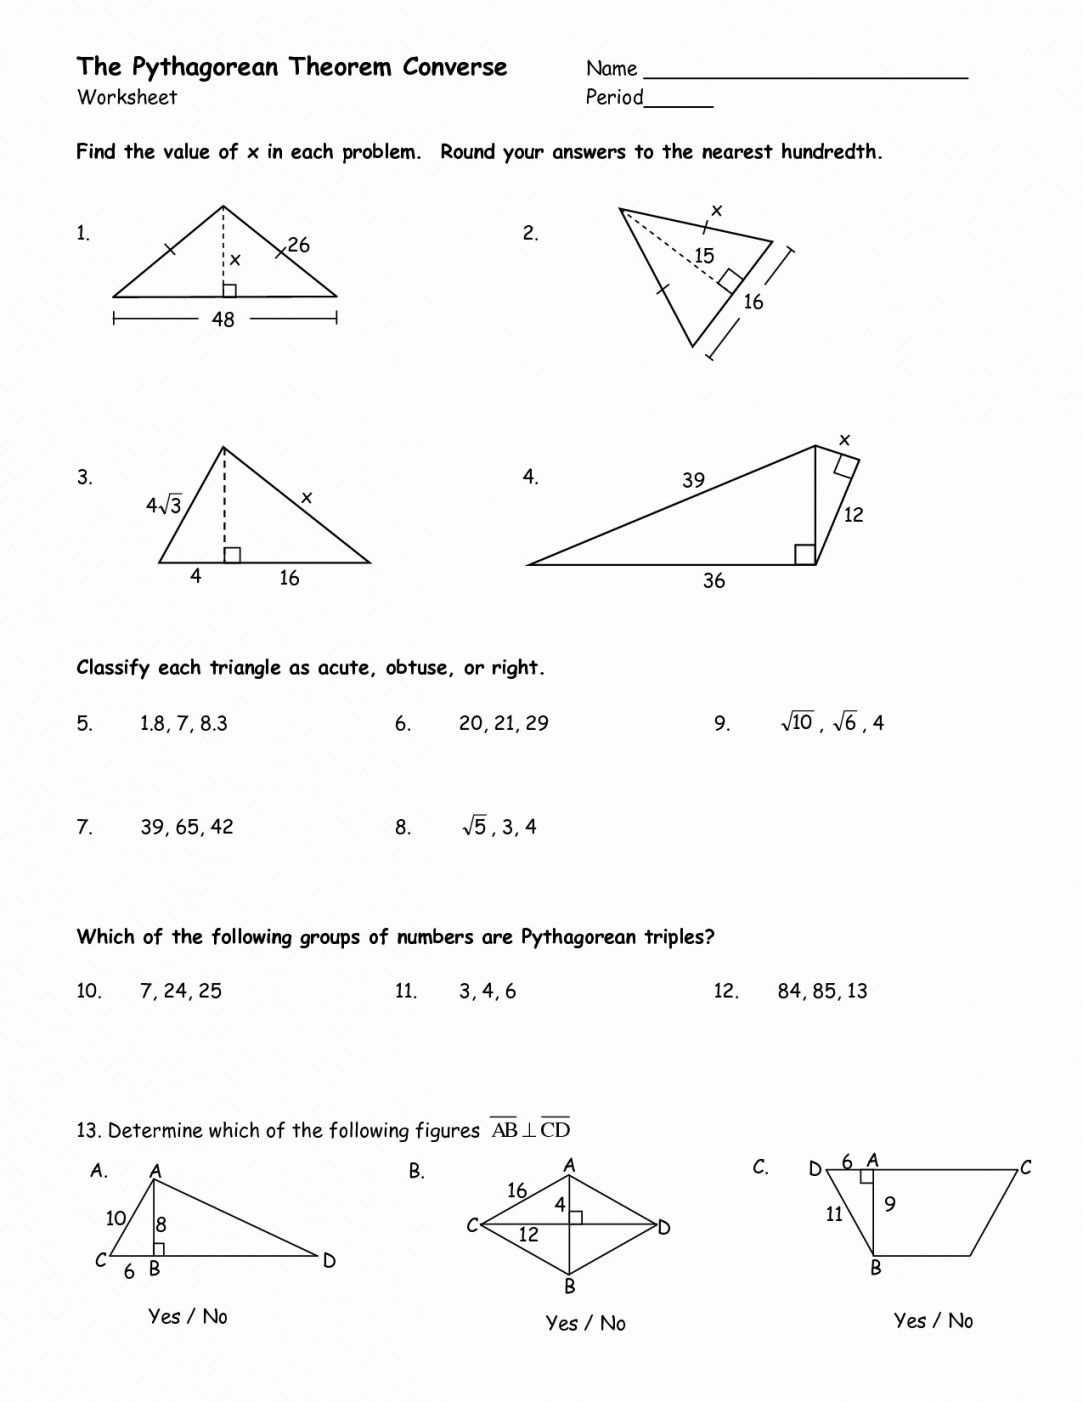 Converse Of The Pythagorean Theorem Worksheet | Lostranquillos - Free Printable Pythagorean Theorem Worksheets